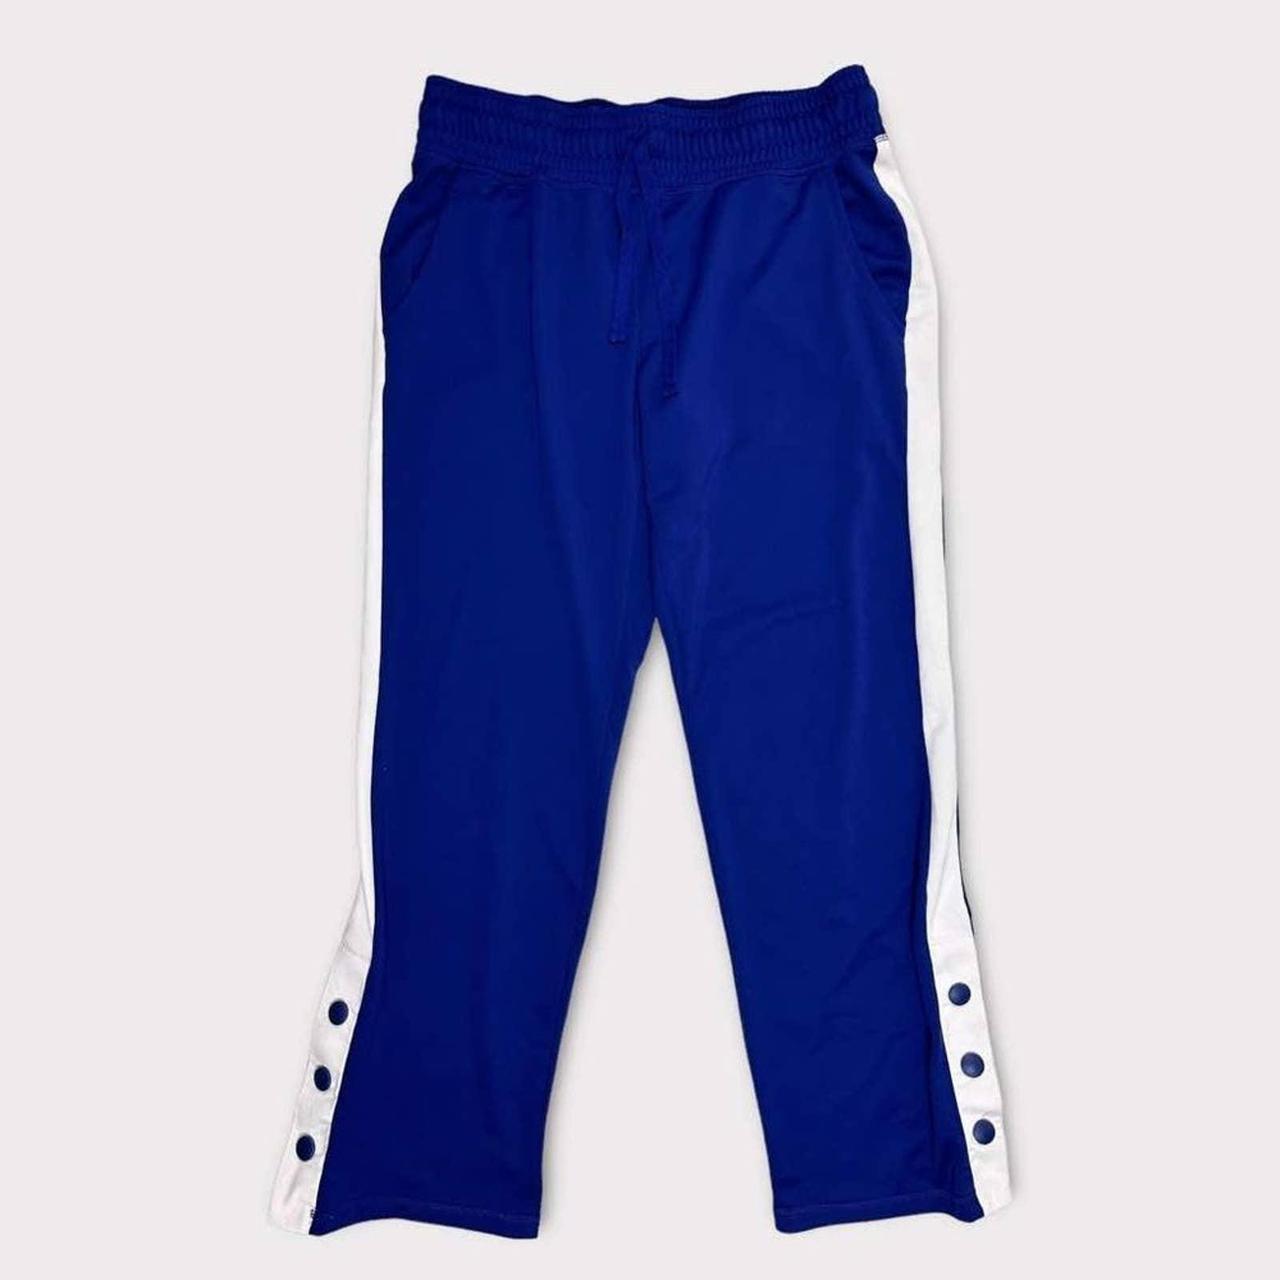 Xersion Joggers Blue and White Size Women's Large - Depop